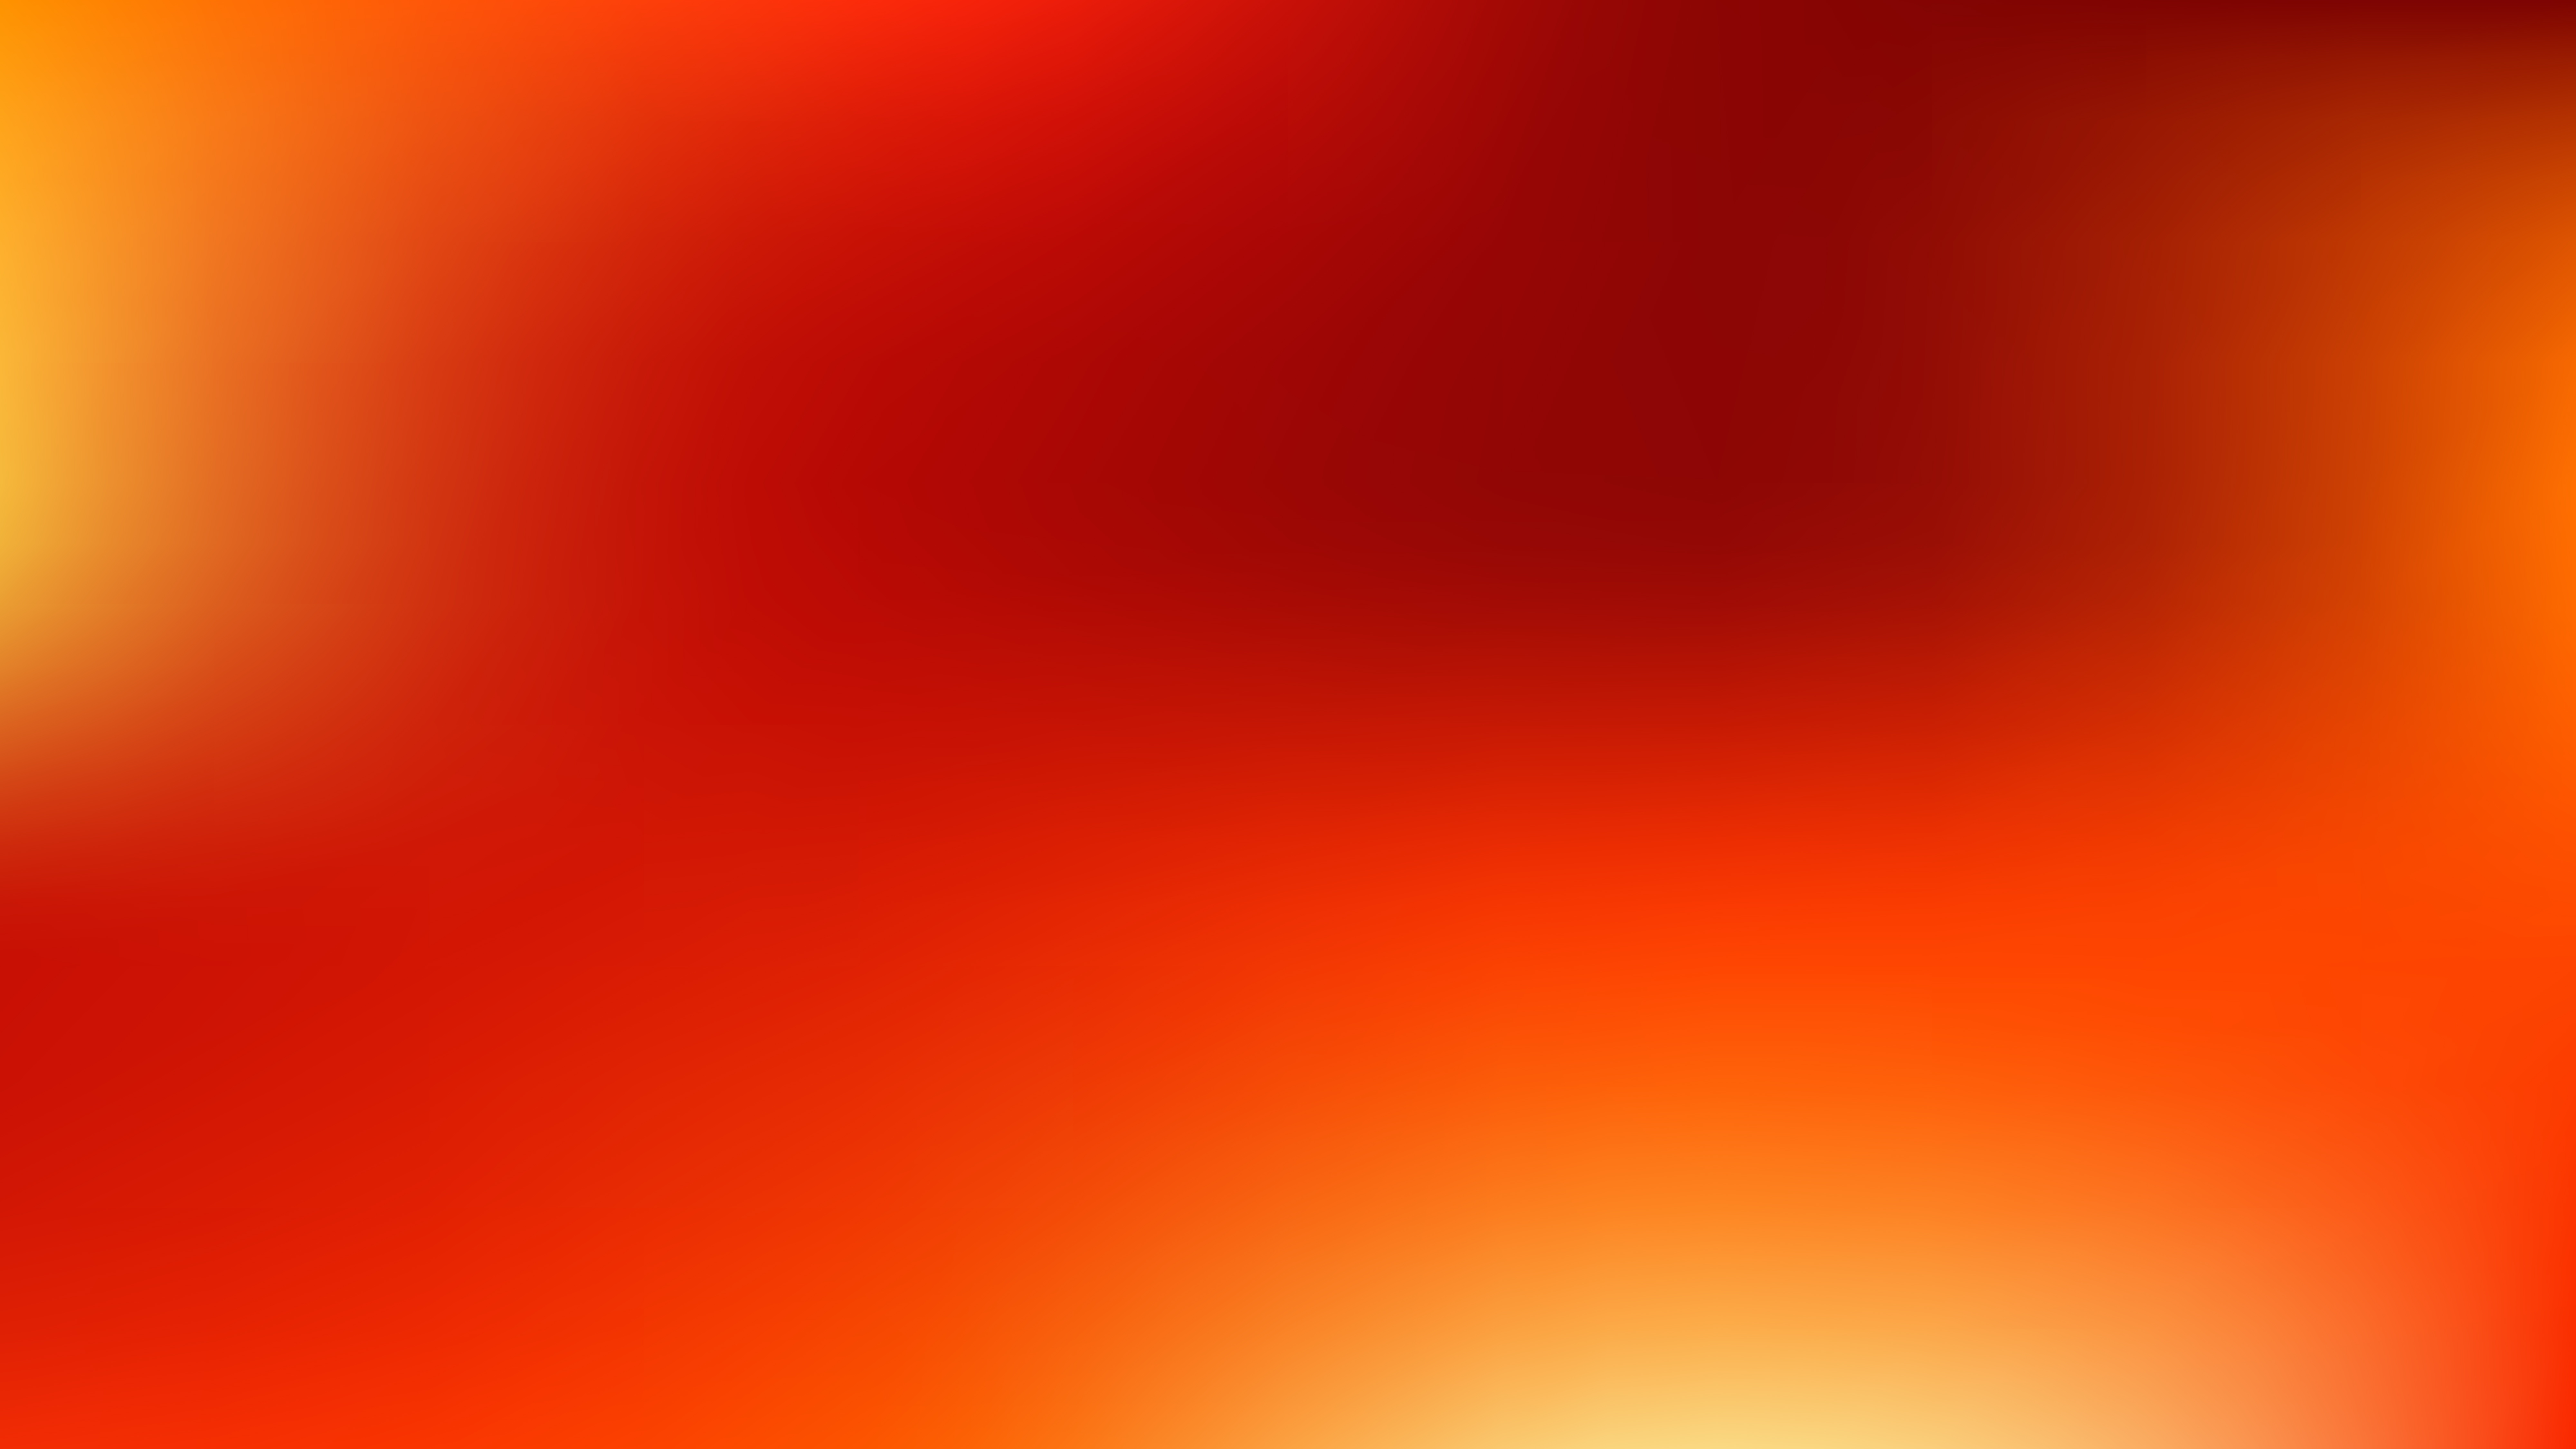 Free Red and Orange Simple Background Graphic